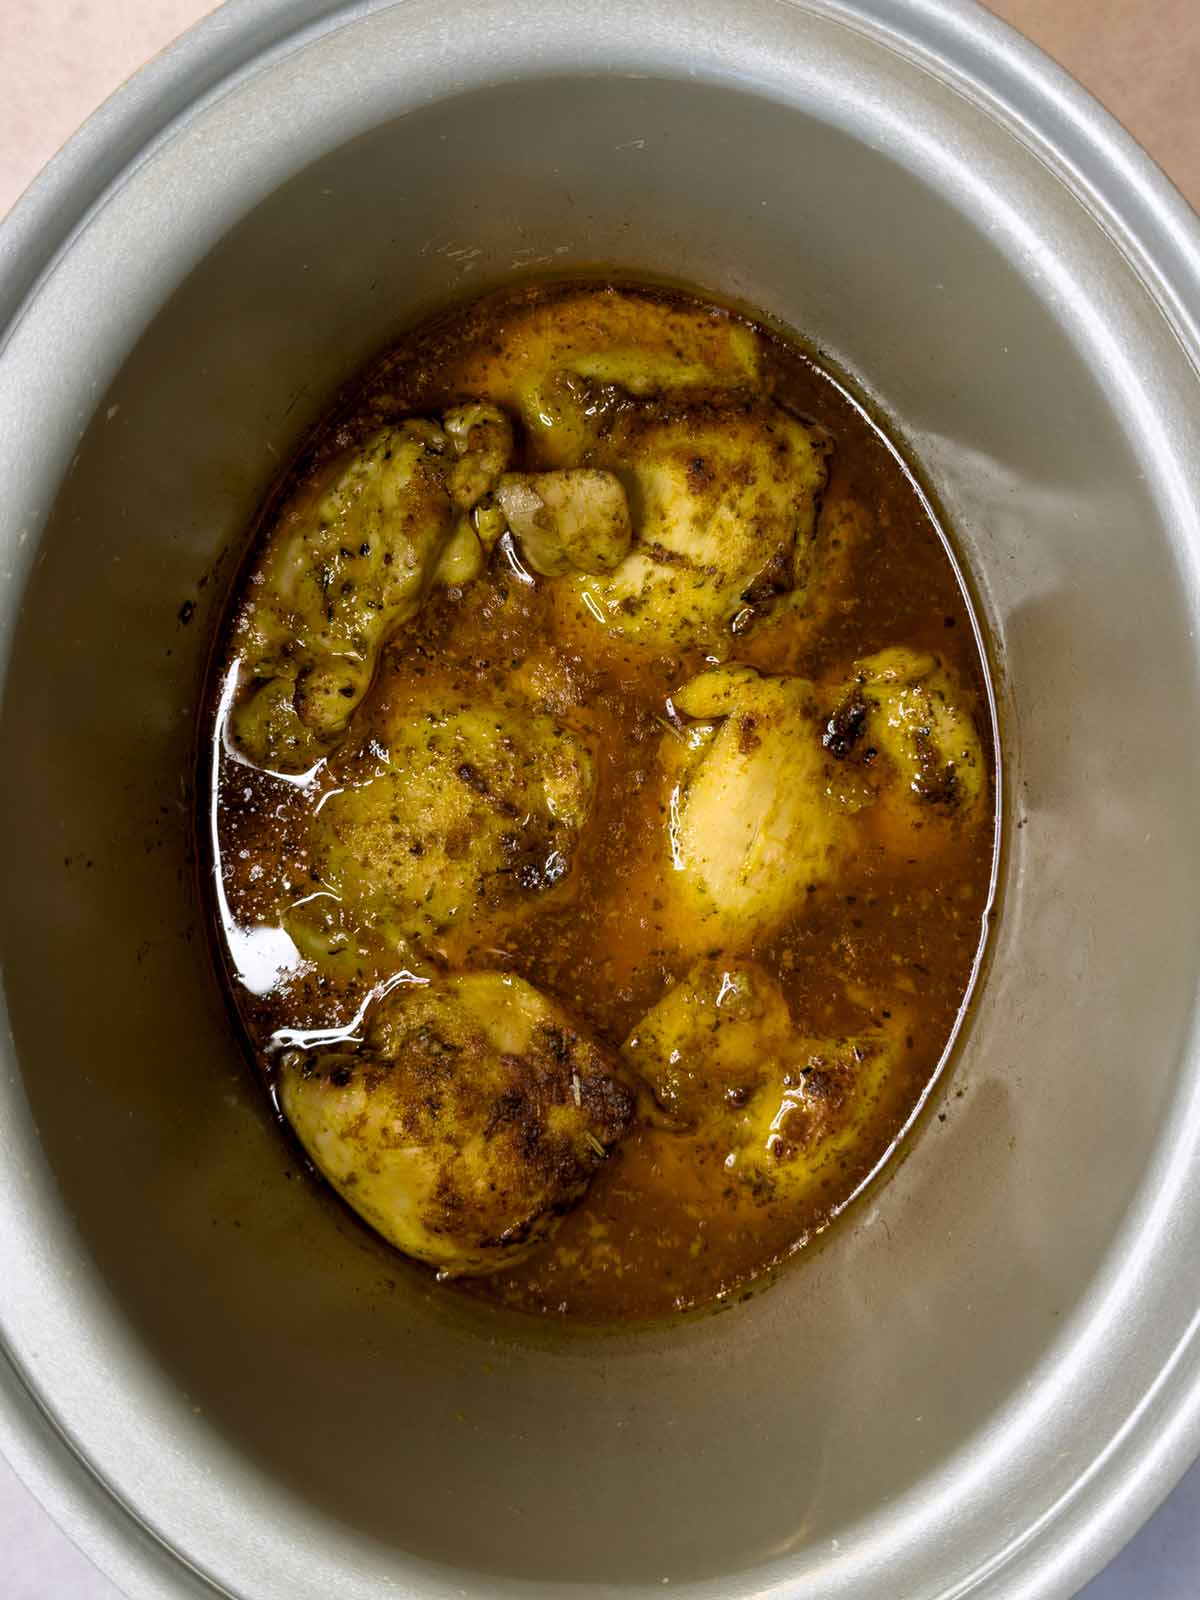 Cooked chicken thighs in stock in a slow cooker.